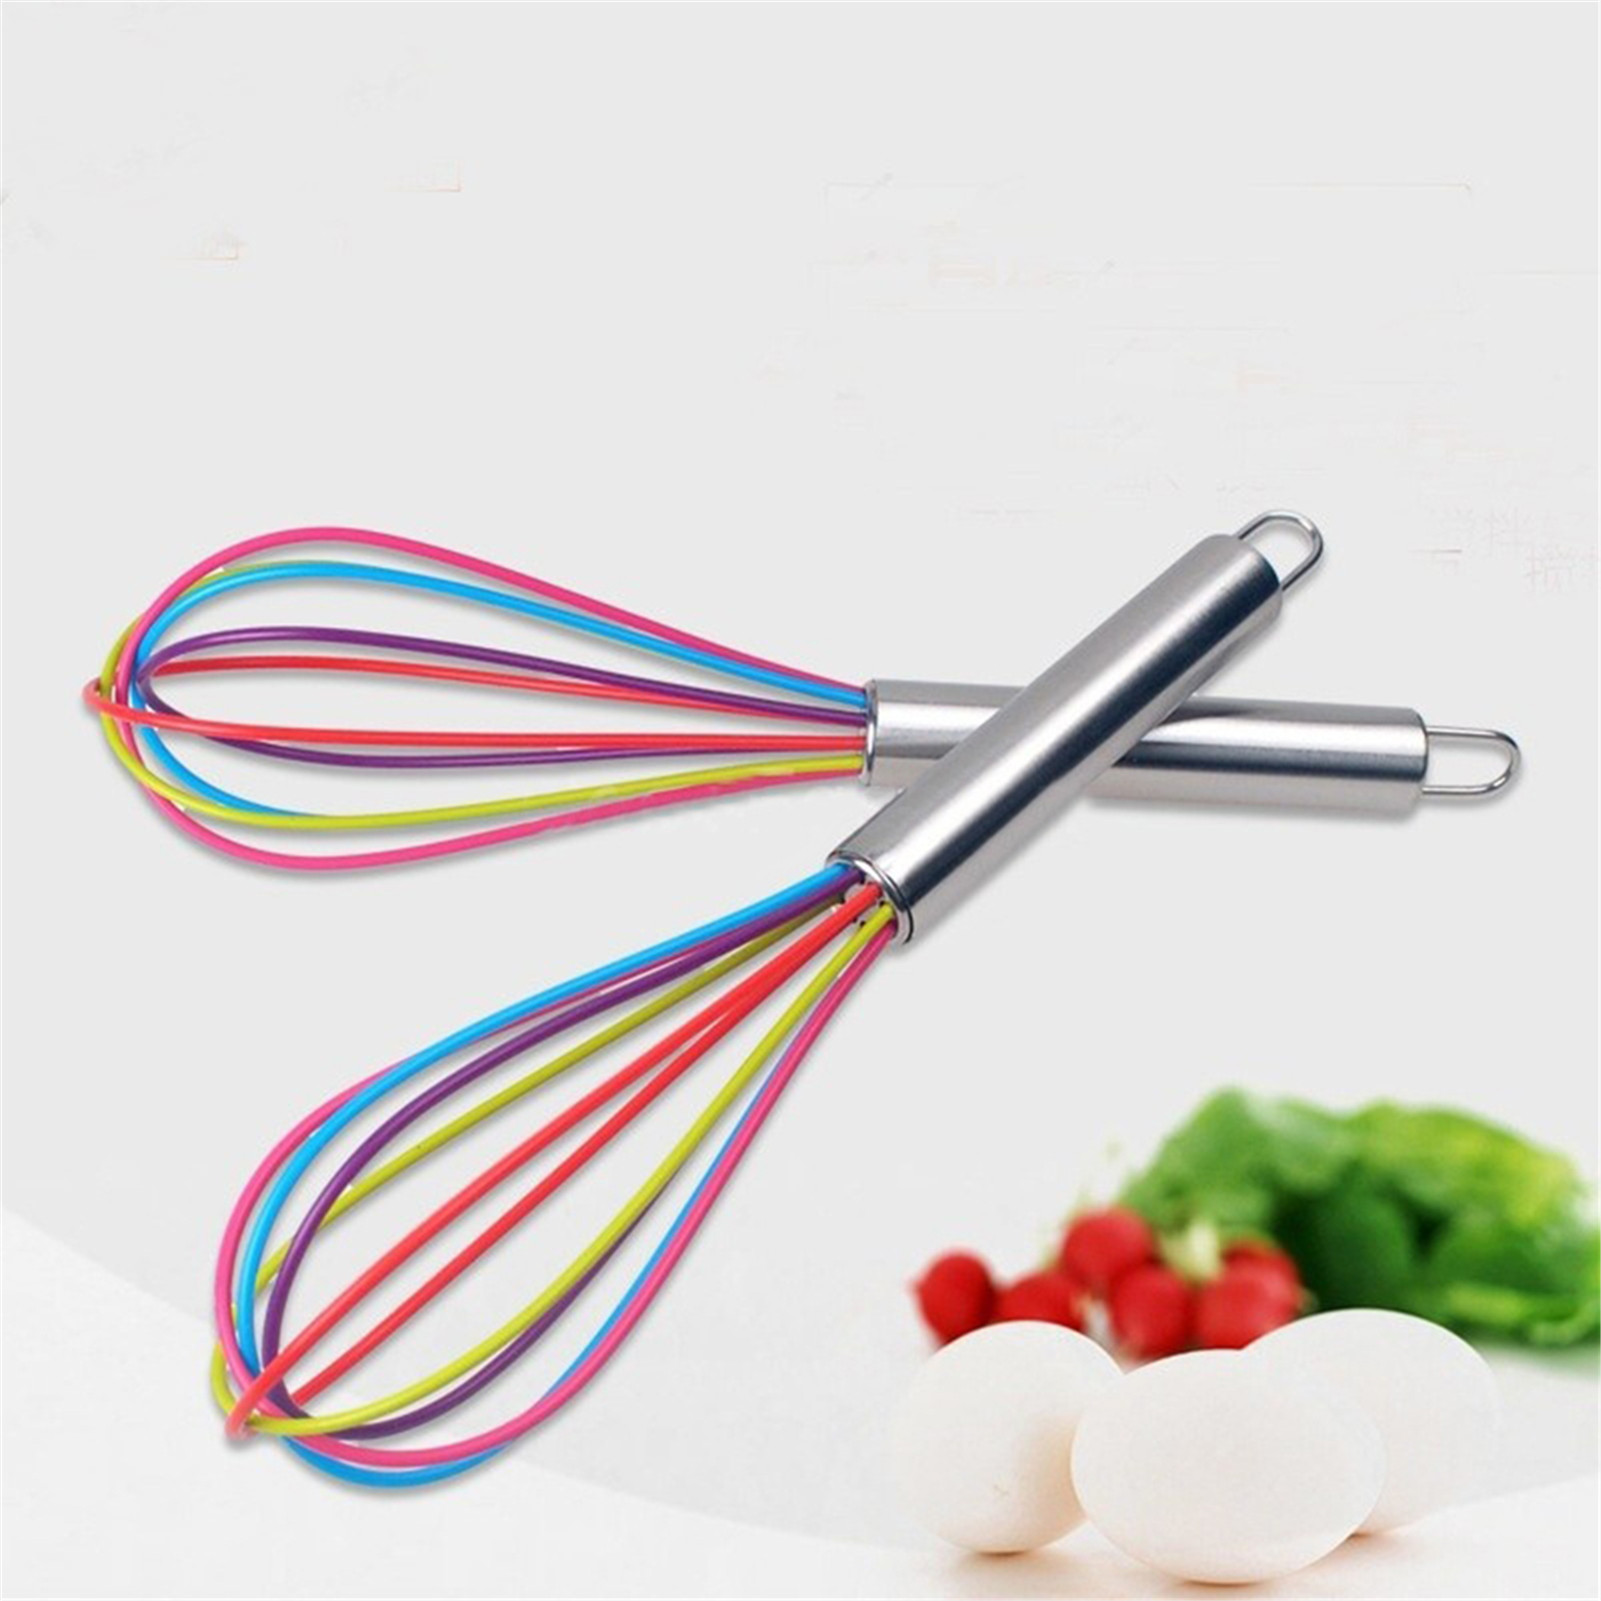 Ludlz Kitchen Collection Stainless Steel Balloon Egg Whisk,Multicolor Stainless Steel Balloon Wire Egg Beater Whisk Tool Kitchen Mixer - image 1 of 7